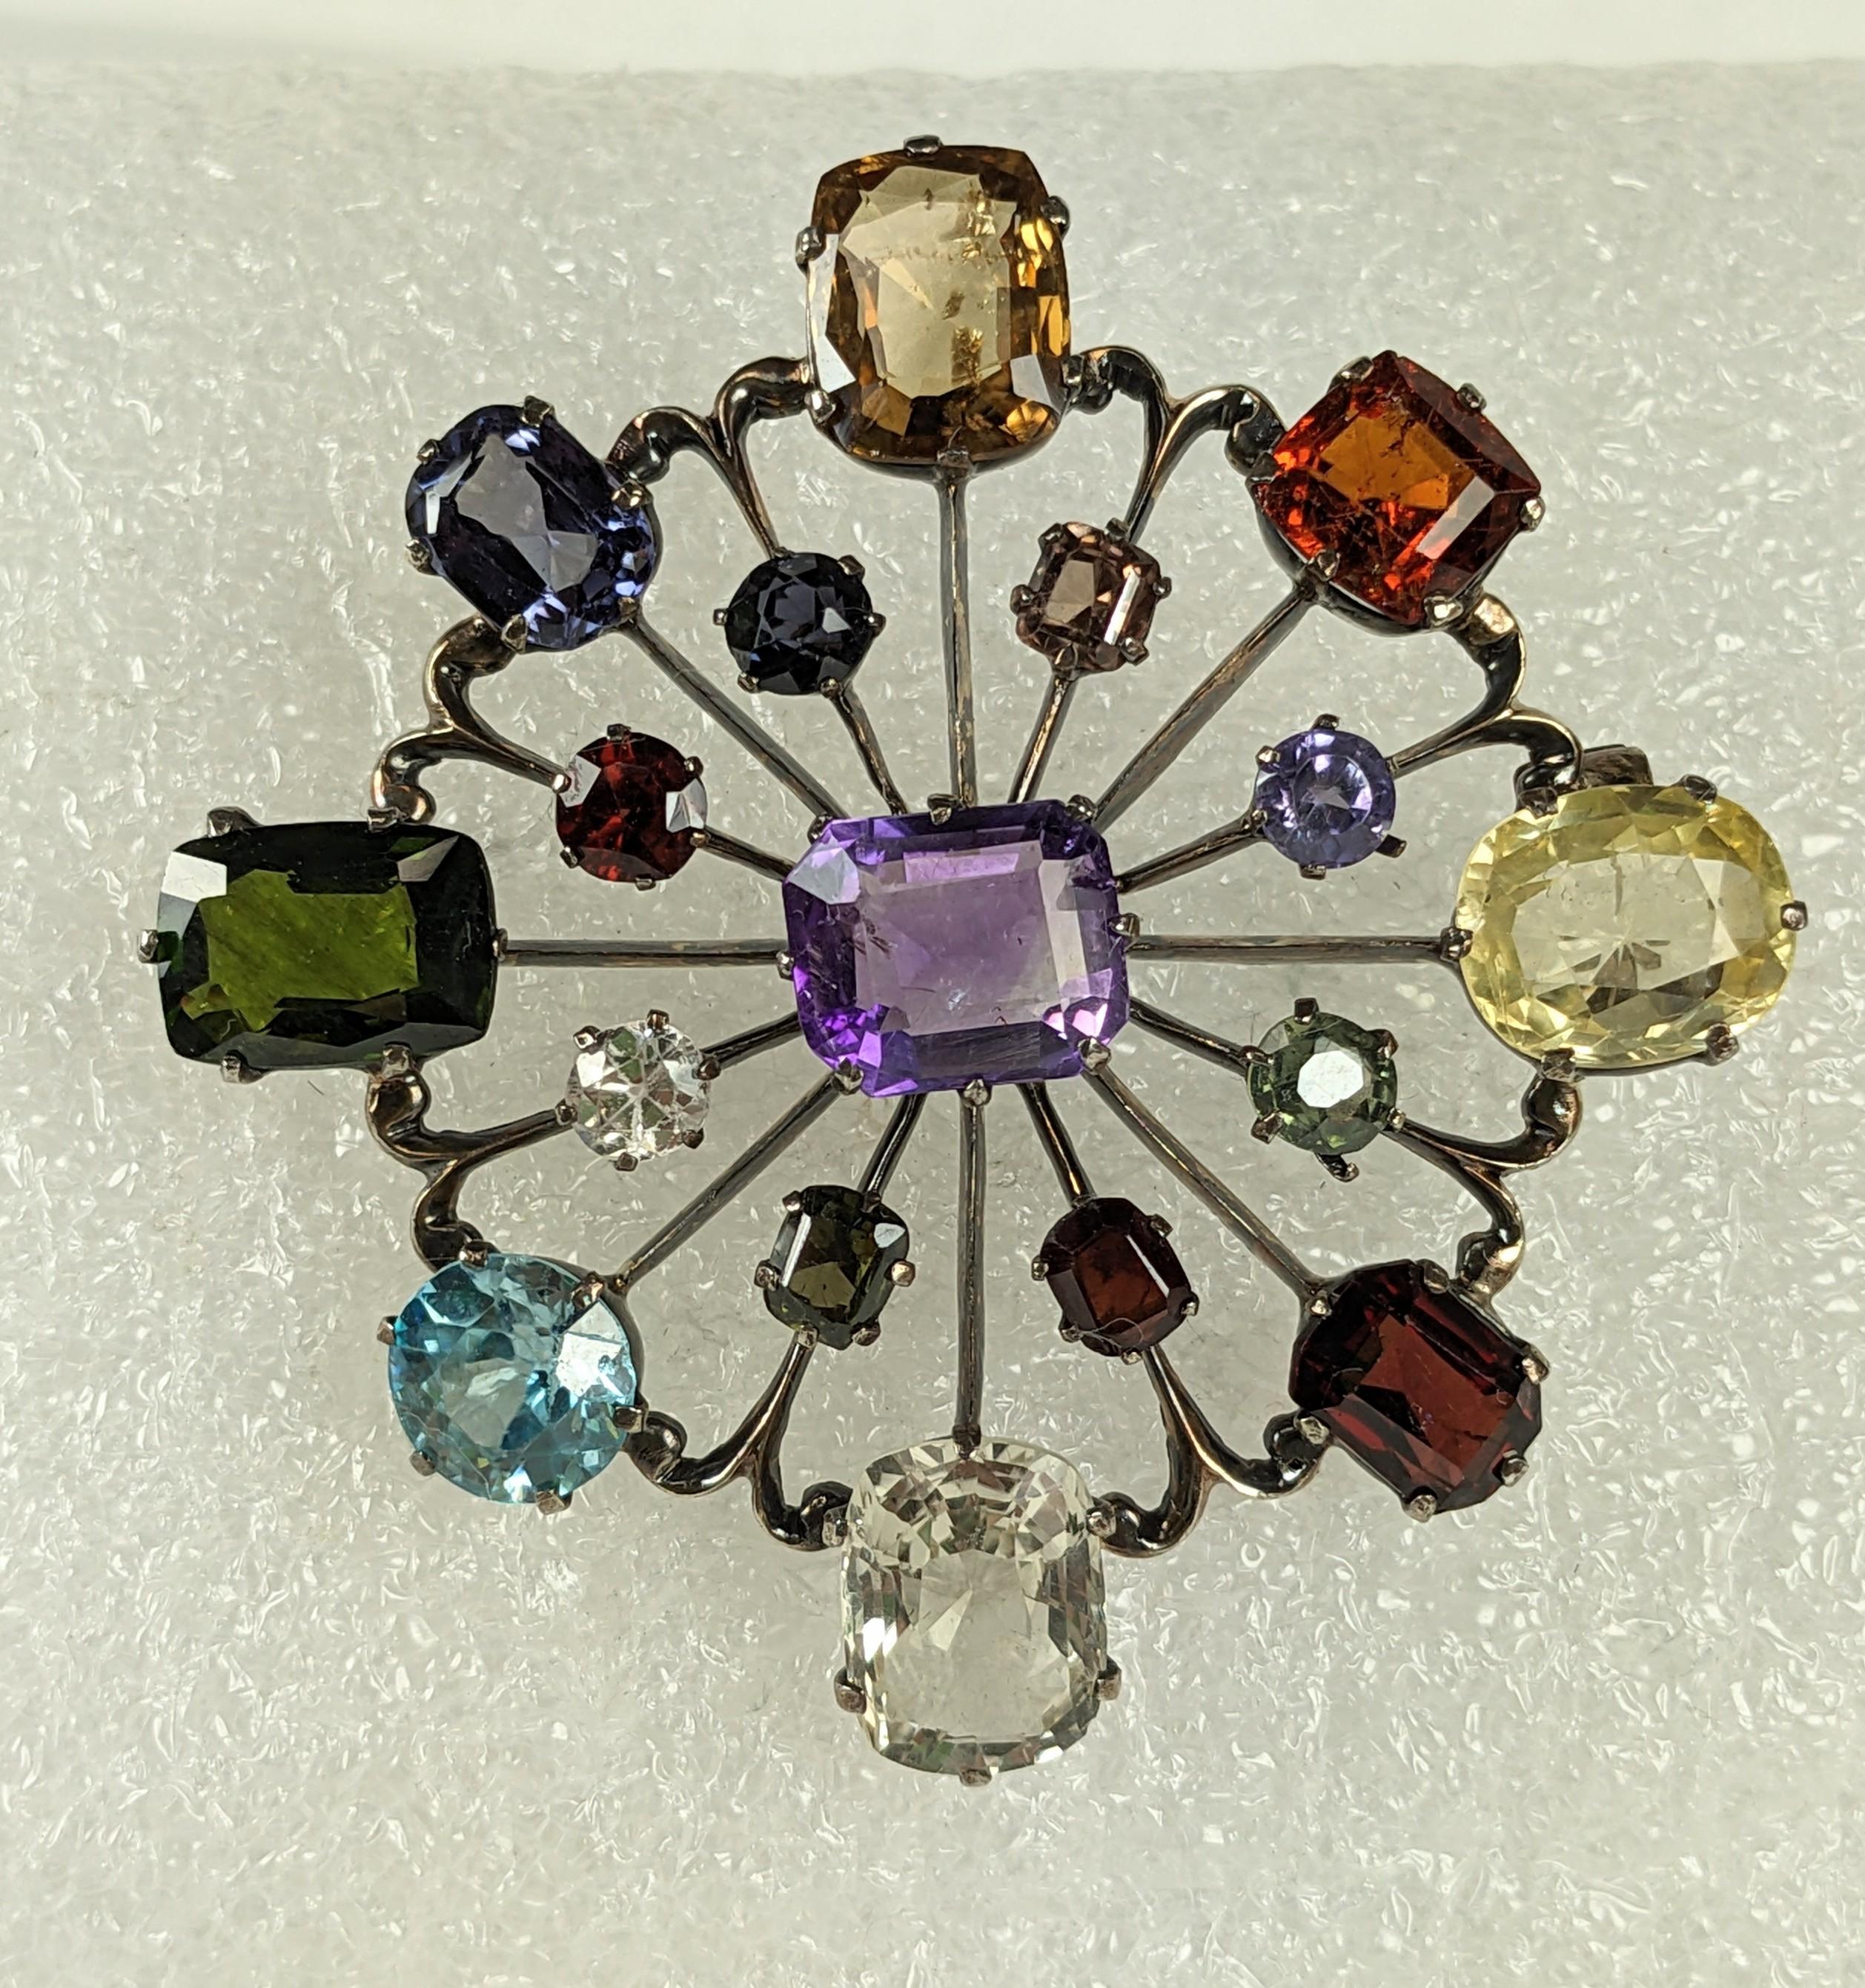 Art Deco Gem Stone Brooch from the 1940's. Set in pink gold vermeil sterling with a lovely array of colored gemstones such as citrine, topaz, zircon, amythest, tourmaline and garnet. 
2.25